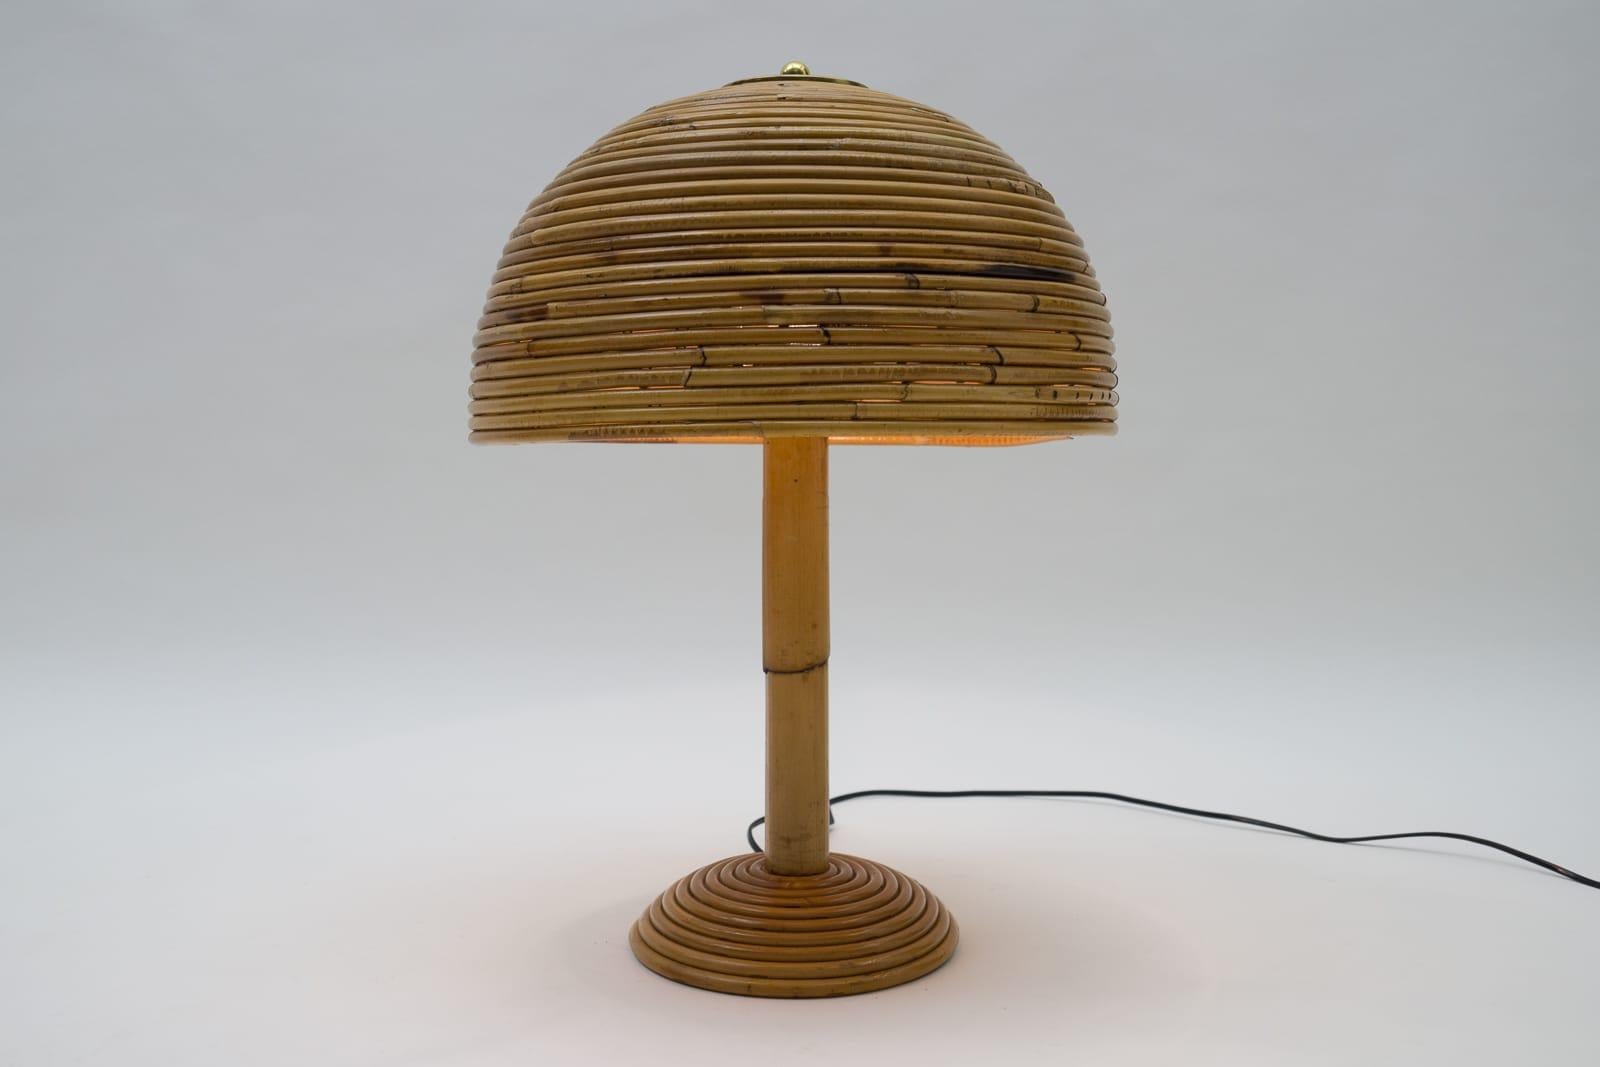 Executed in rattan and fabric, the lamp comes with 1 x E27 / E26 Edison screw fit bulb holder, is wired, in working condition and runs both on 110 / 230 volt.